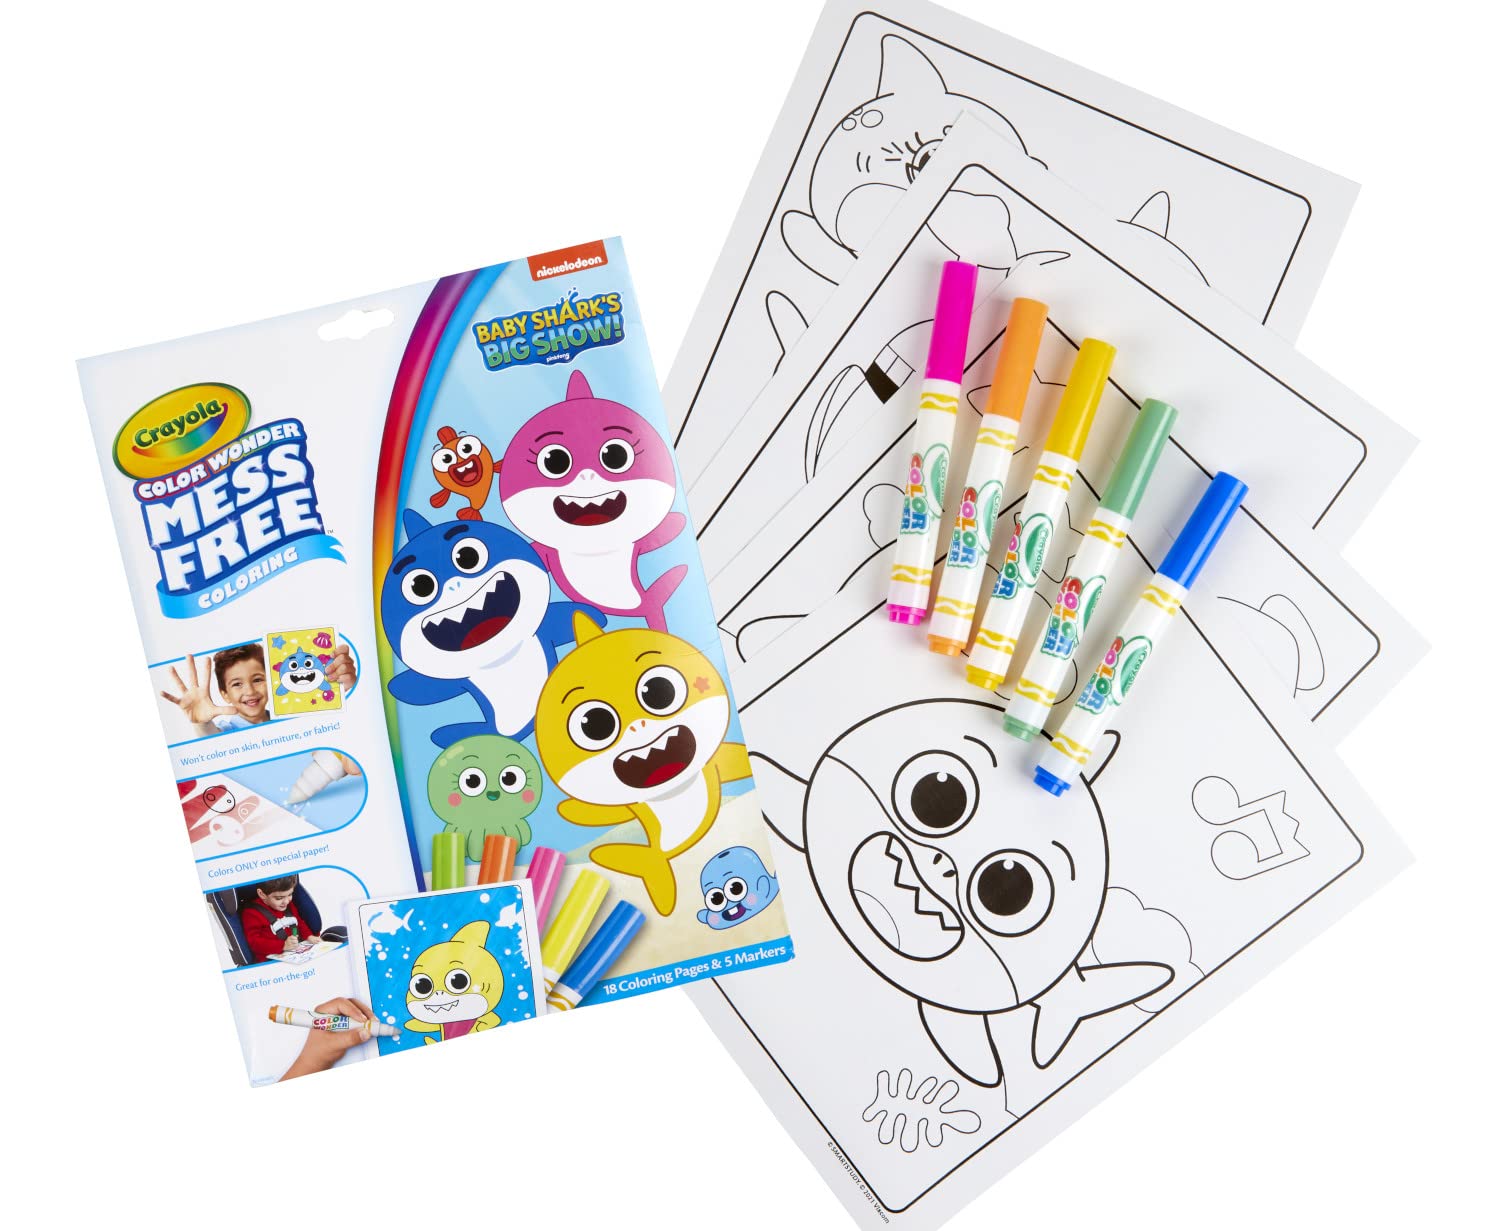 Crayola Baby Shark Color Wonder Pages (18 Pages & 5 Markers), Mess Free Coloring For Toddlers, Gift for Kids, Travel Activities